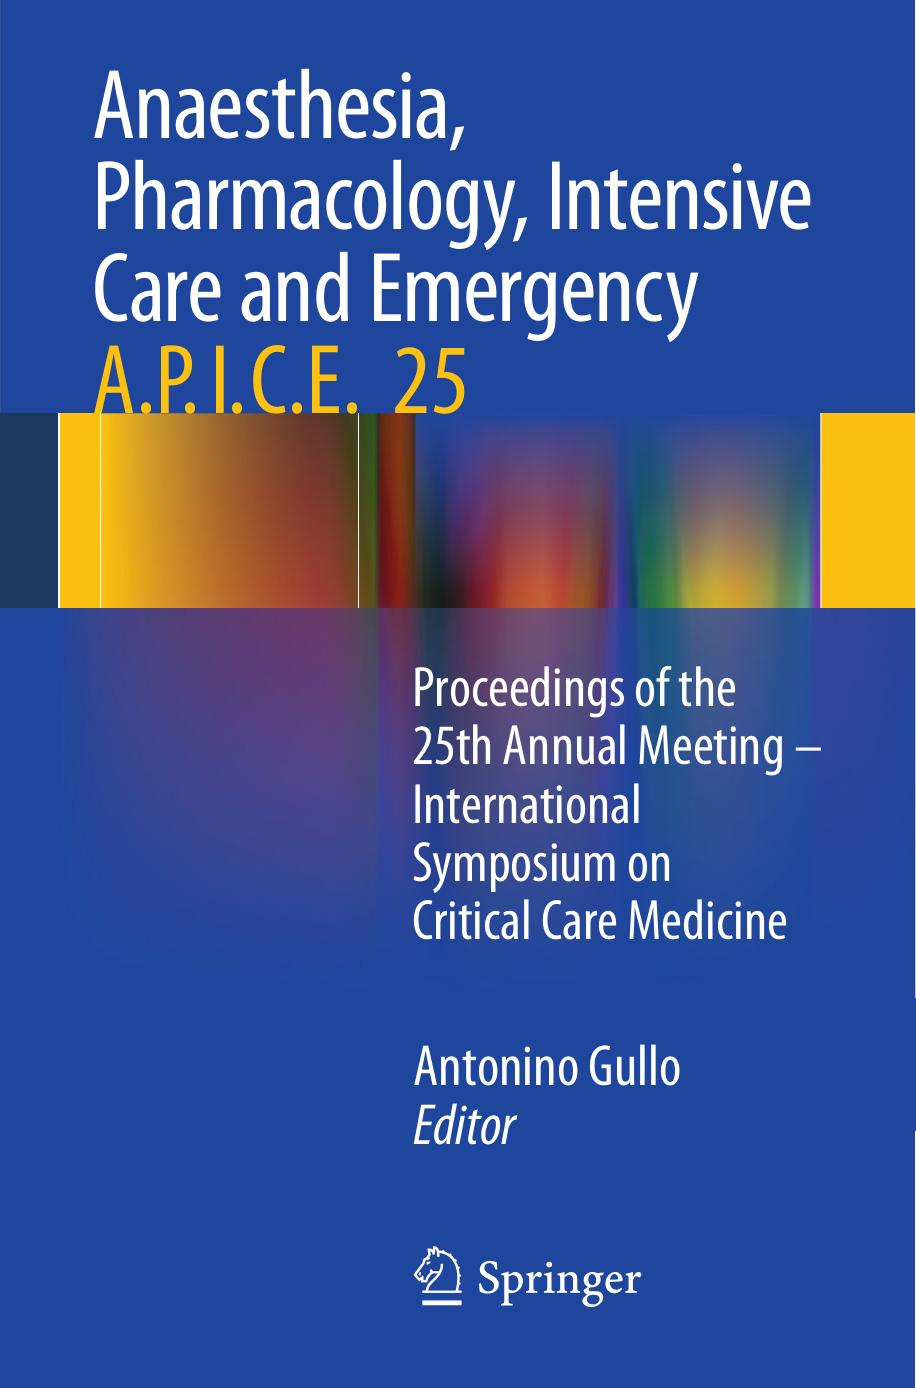 Anaesthesia, Pharmacology, Intensive Care and Emergency A.P.I.C.E 2014